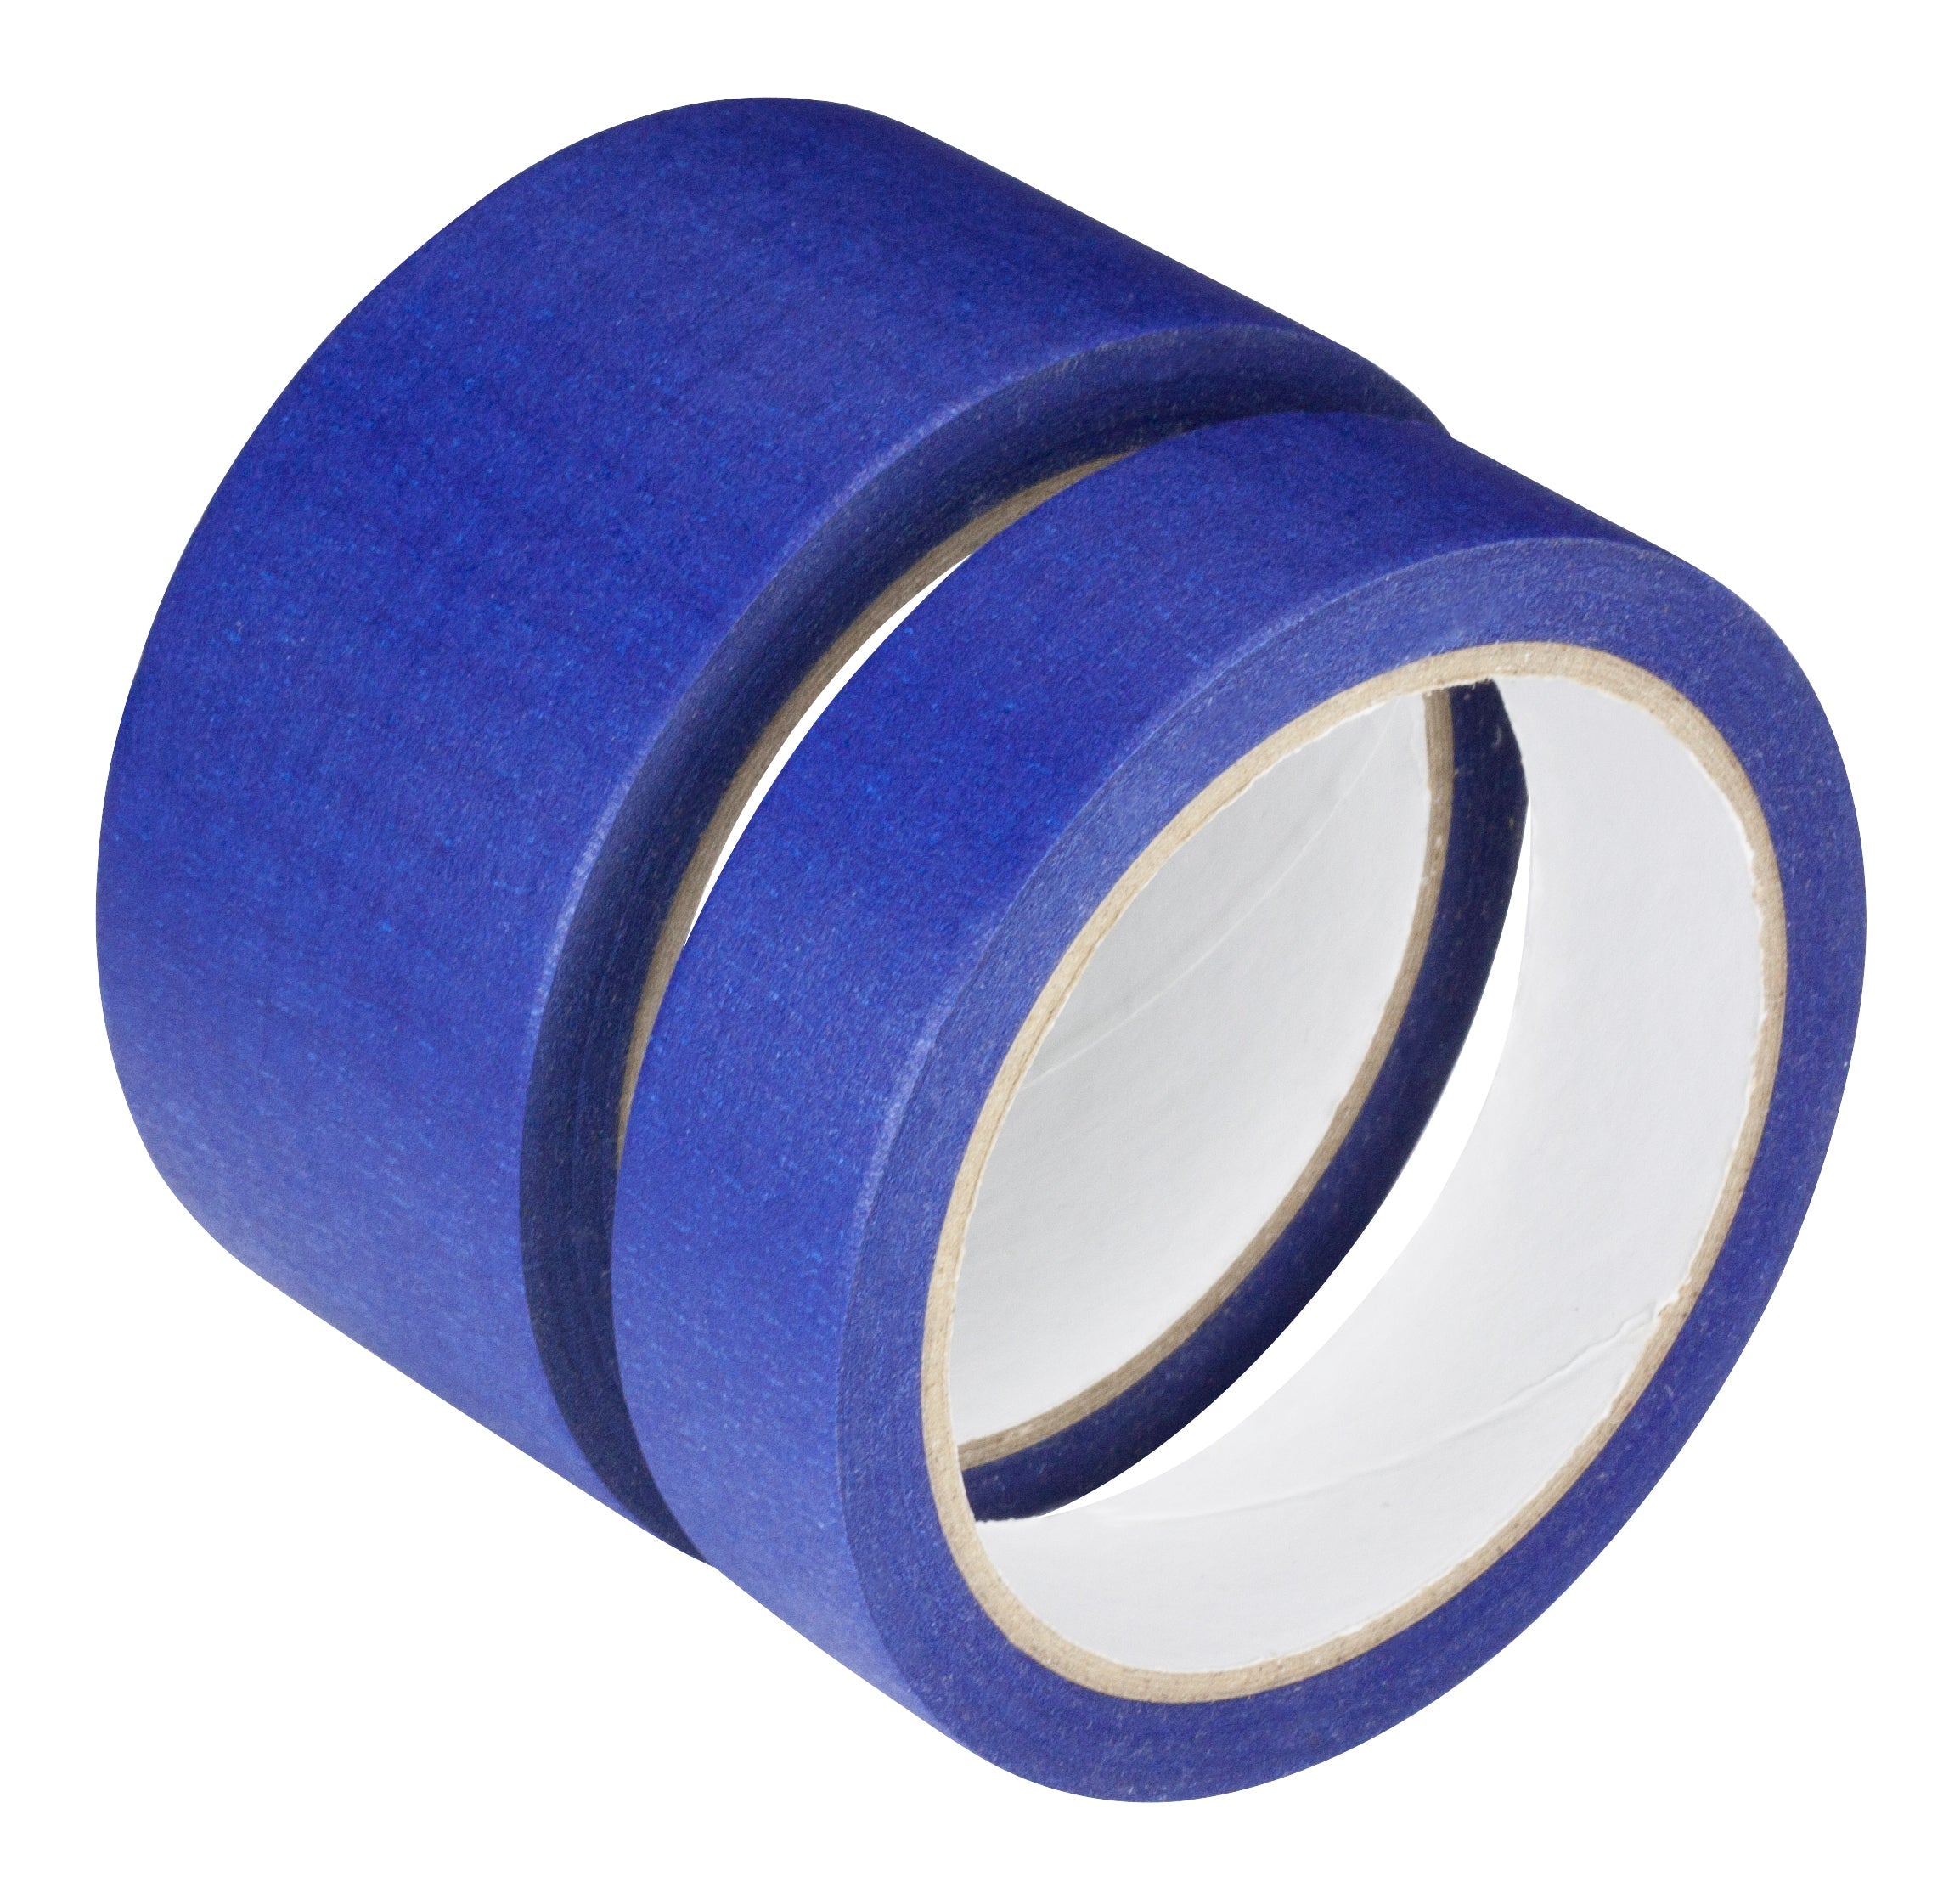 Masking Tape 25mm x 50m (Premium Quality) 0.12mm Thickness BLUE, UV Rated - Per Pack